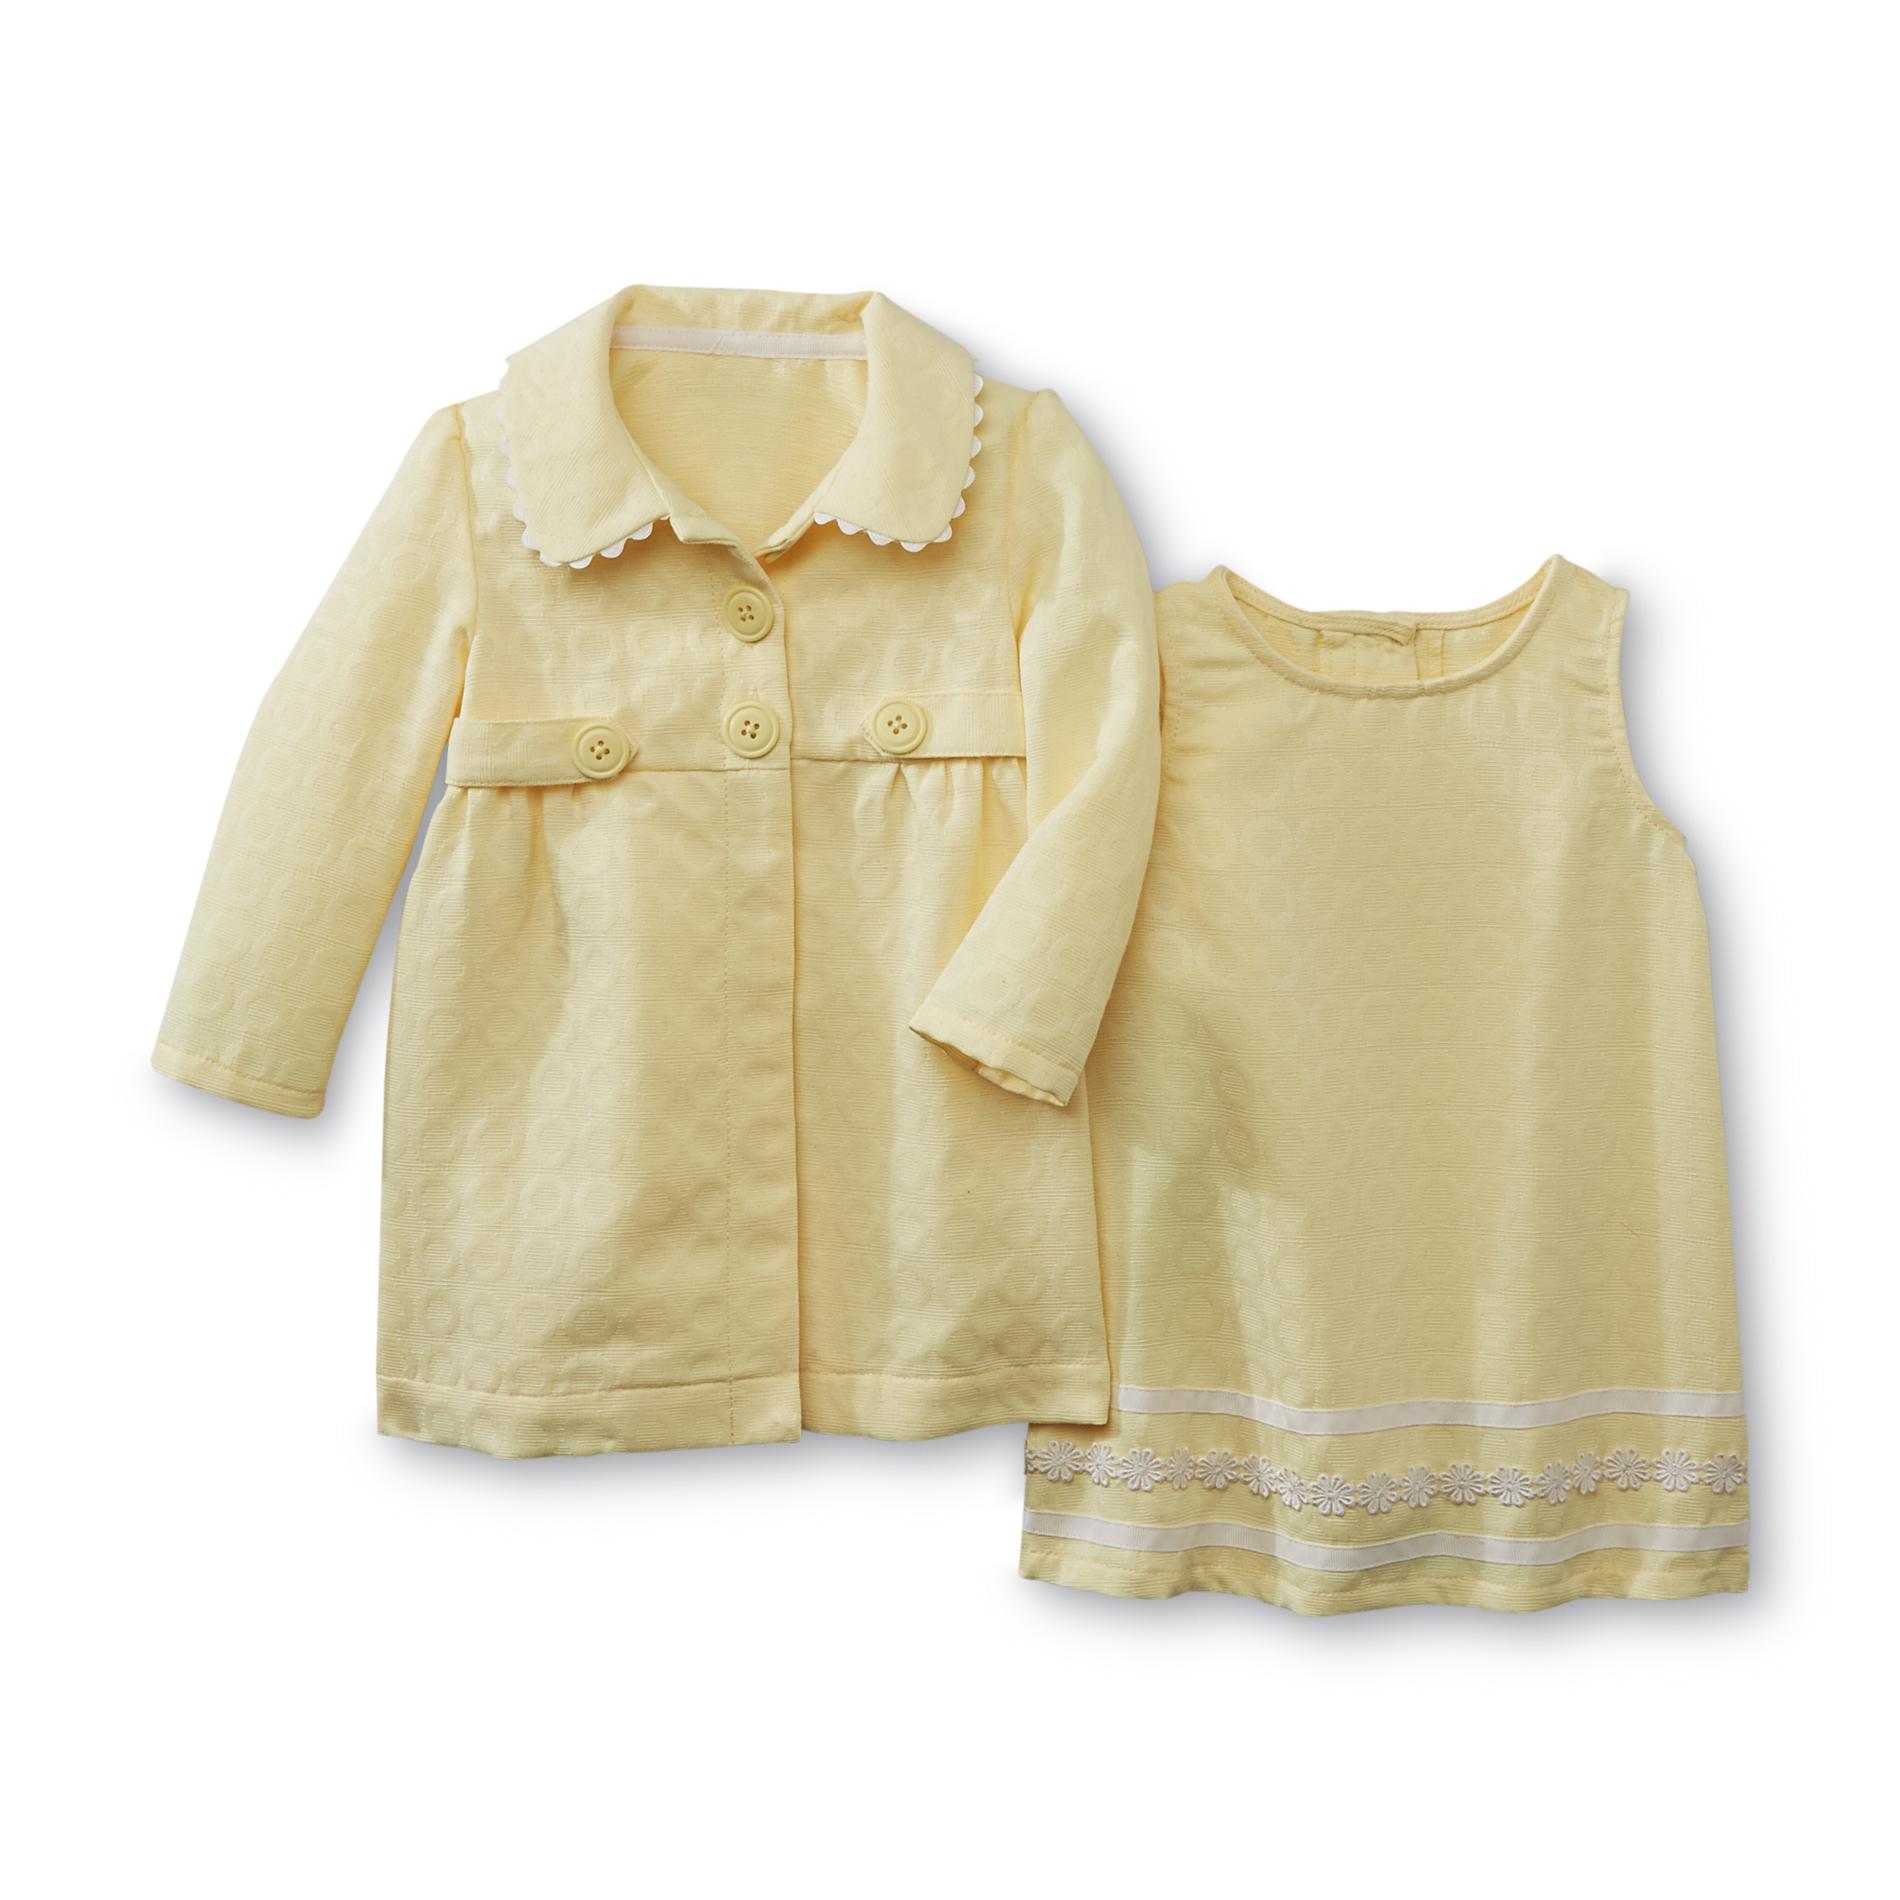 Holiday Editions Infant & Toddler Girl's Dress & Coat